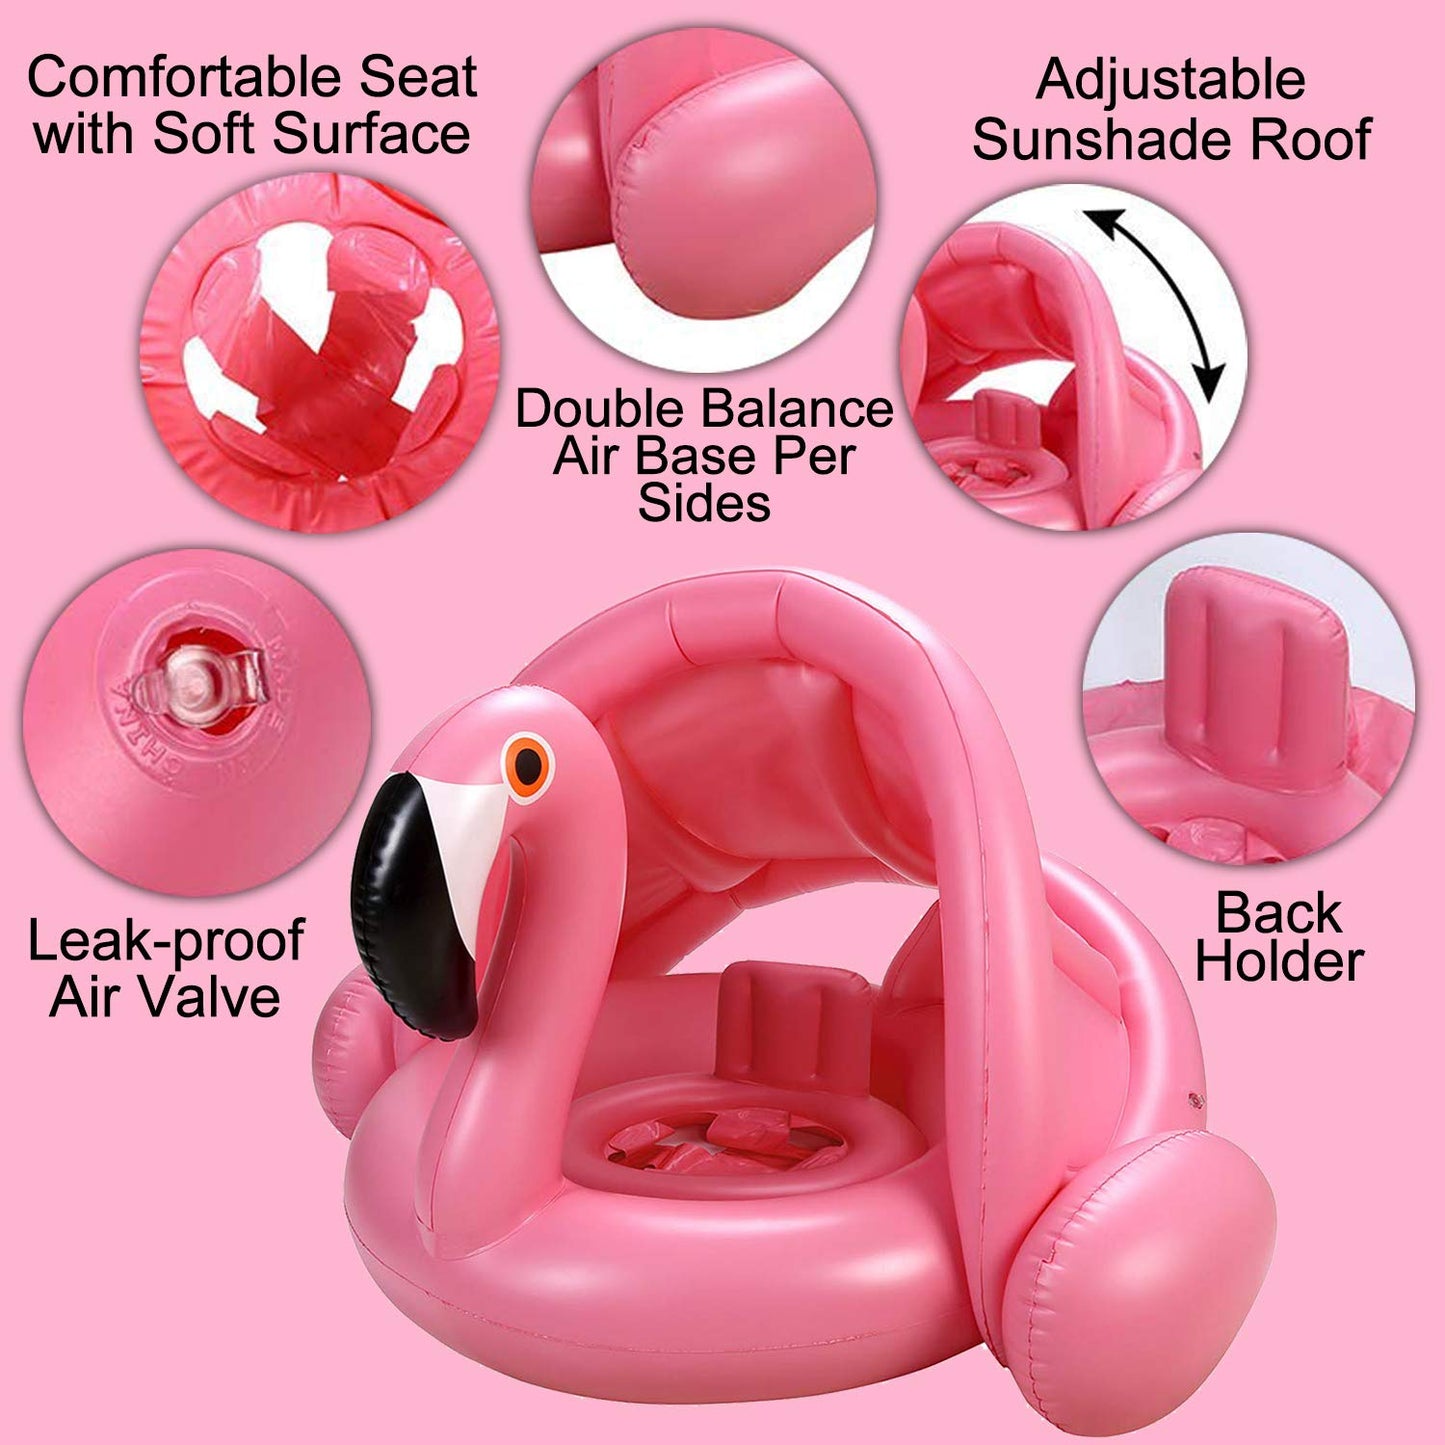 Flamingo Baby Swimming Ring with UPF 50+ Canopy Back Holder Never Flip, Inflatable Baby Pool Float Sunshade for Infant Kids Boys Girls Toddlers Summer Outdoor Beach Water Toys Pink